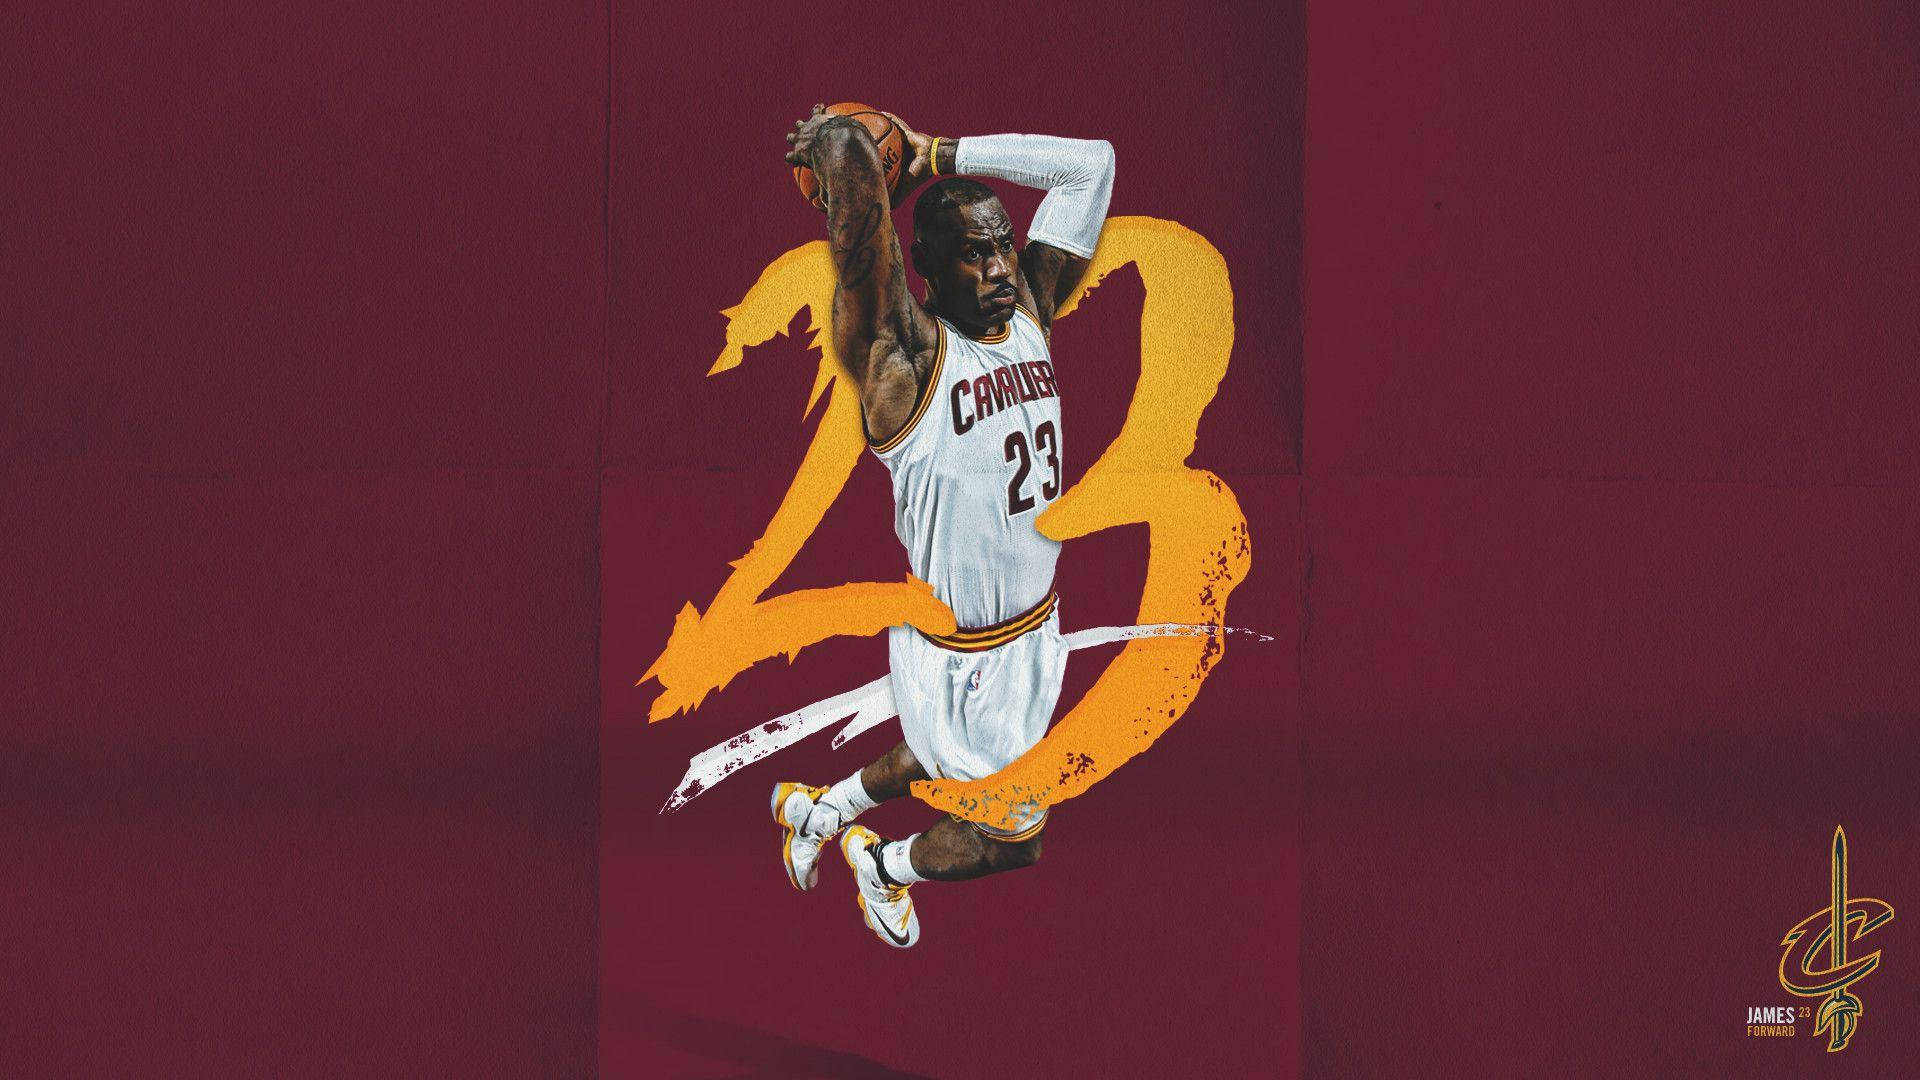 Lebron James 1920X1080 Wallpaper and Background Image